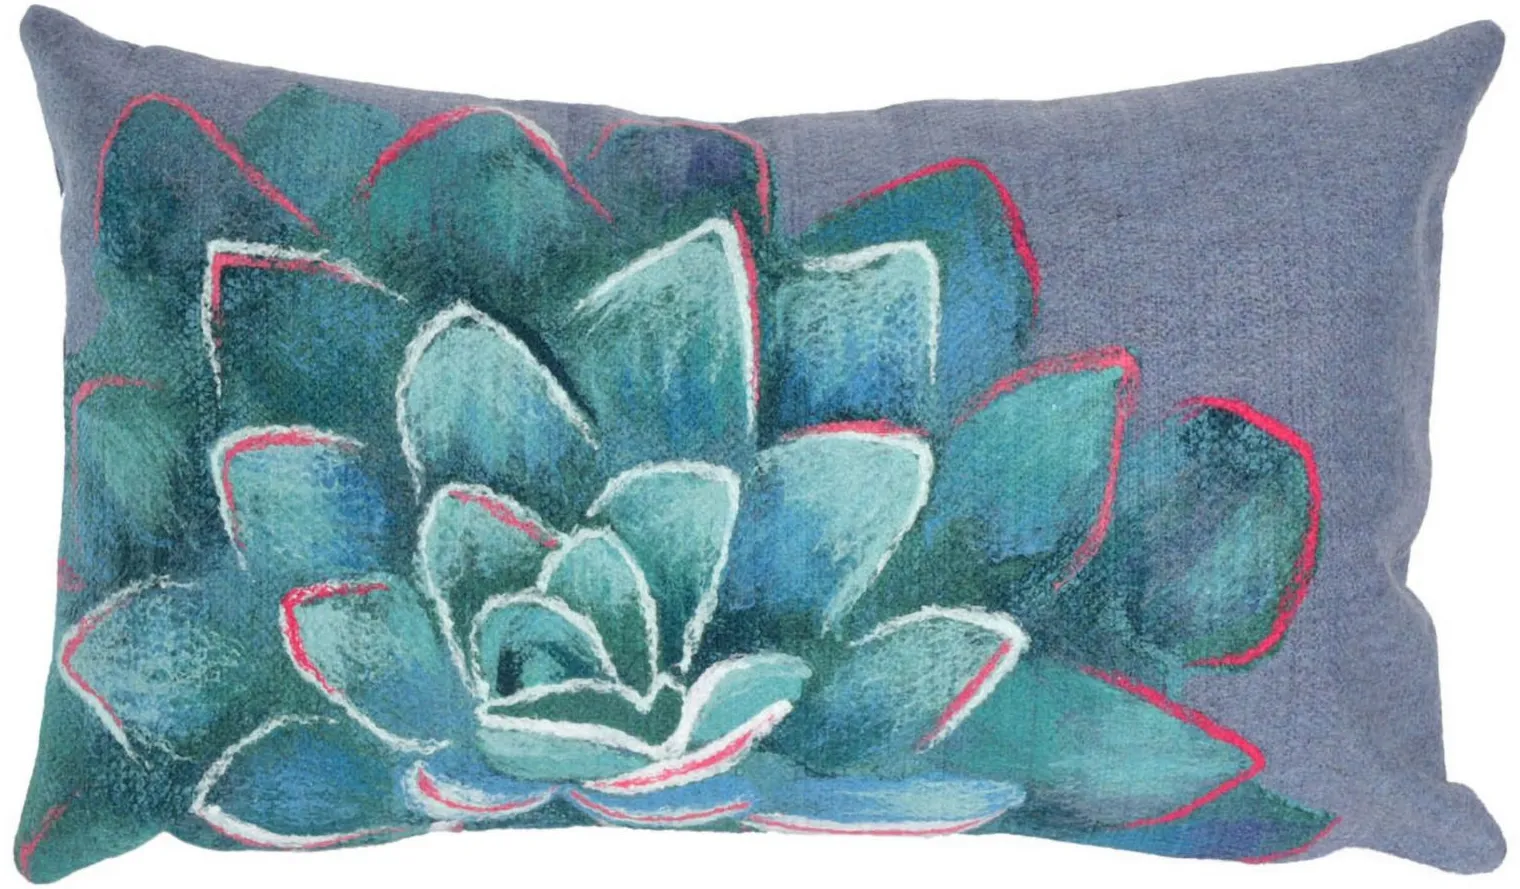 Liora Manne Visions III Succulent Pillow in Blue by Trans-Ocean Import Co Inc